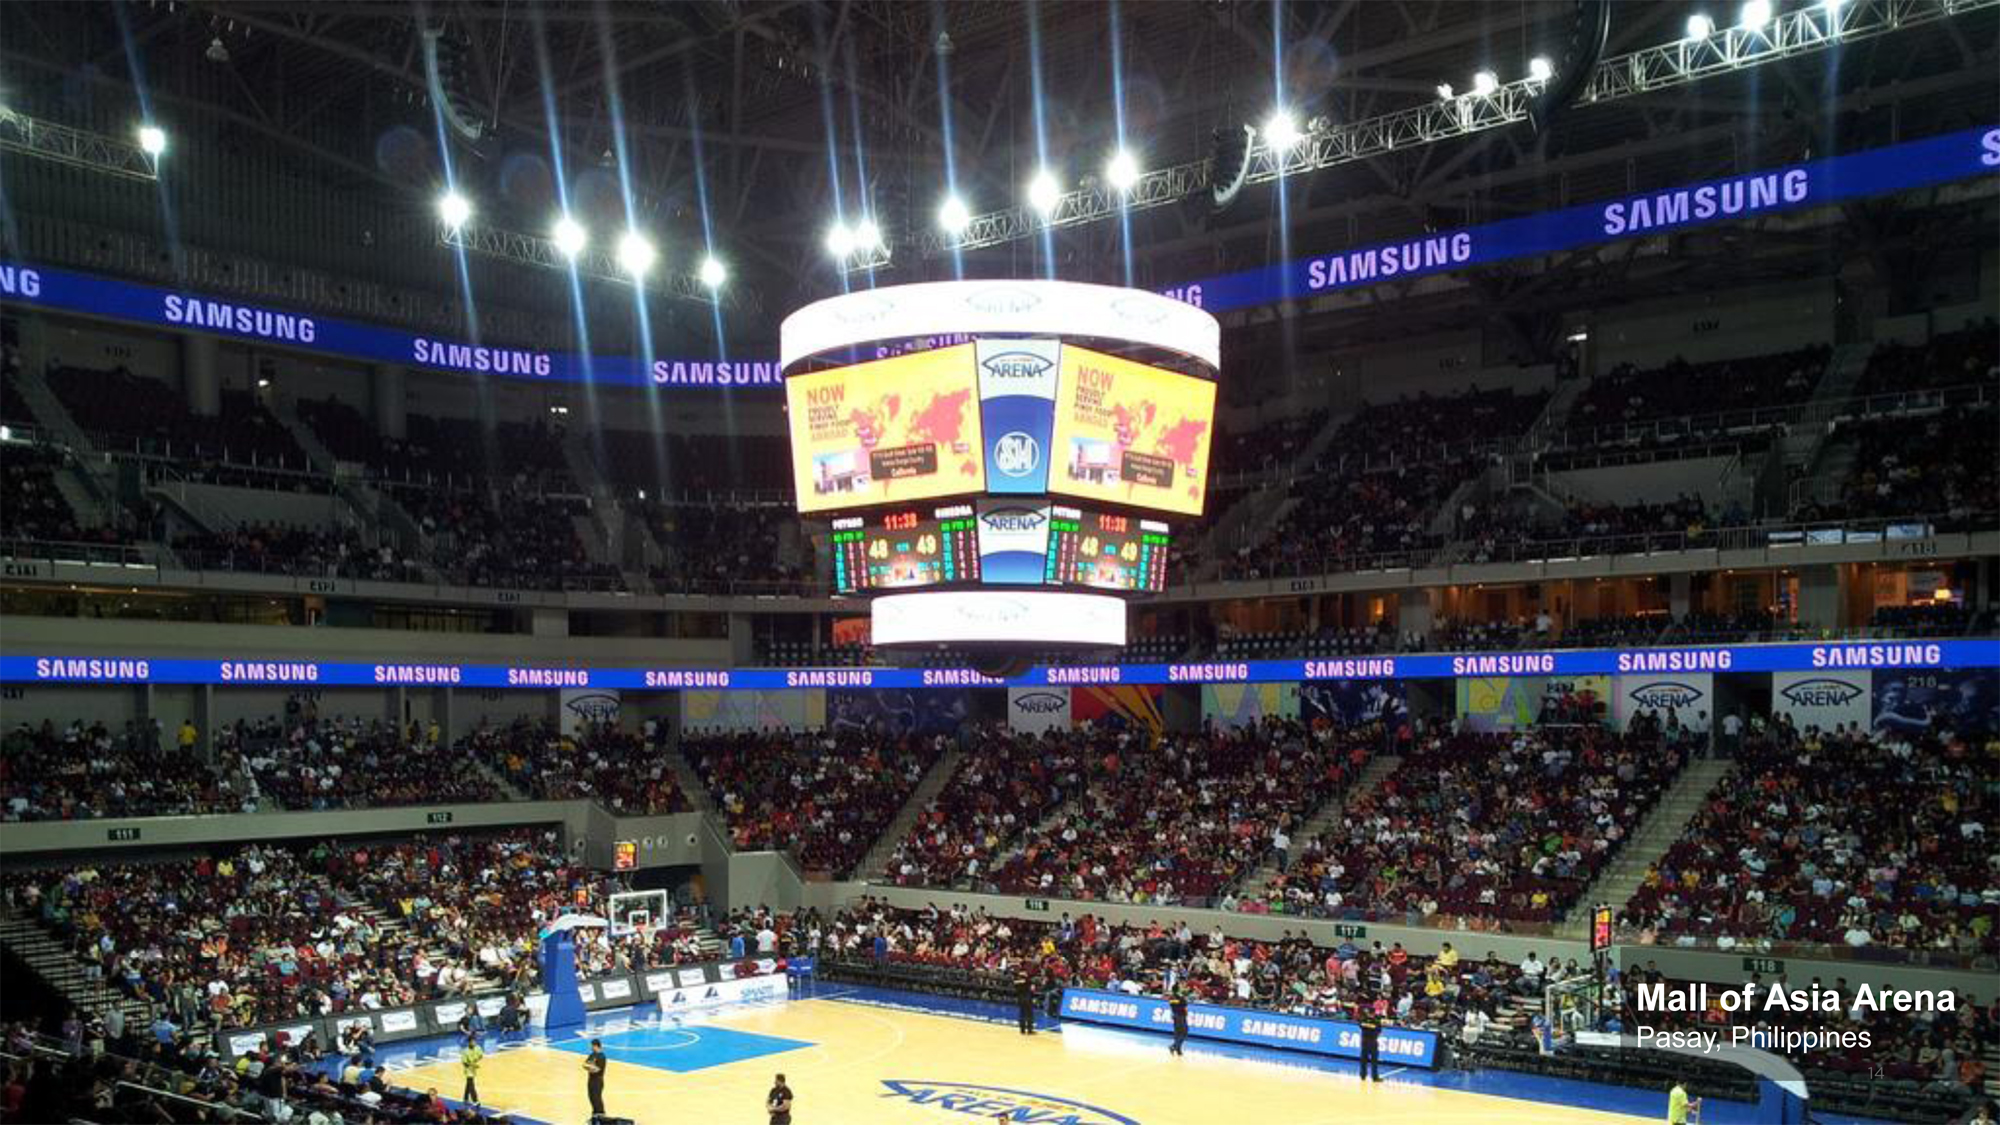 Mall of Asia Arena